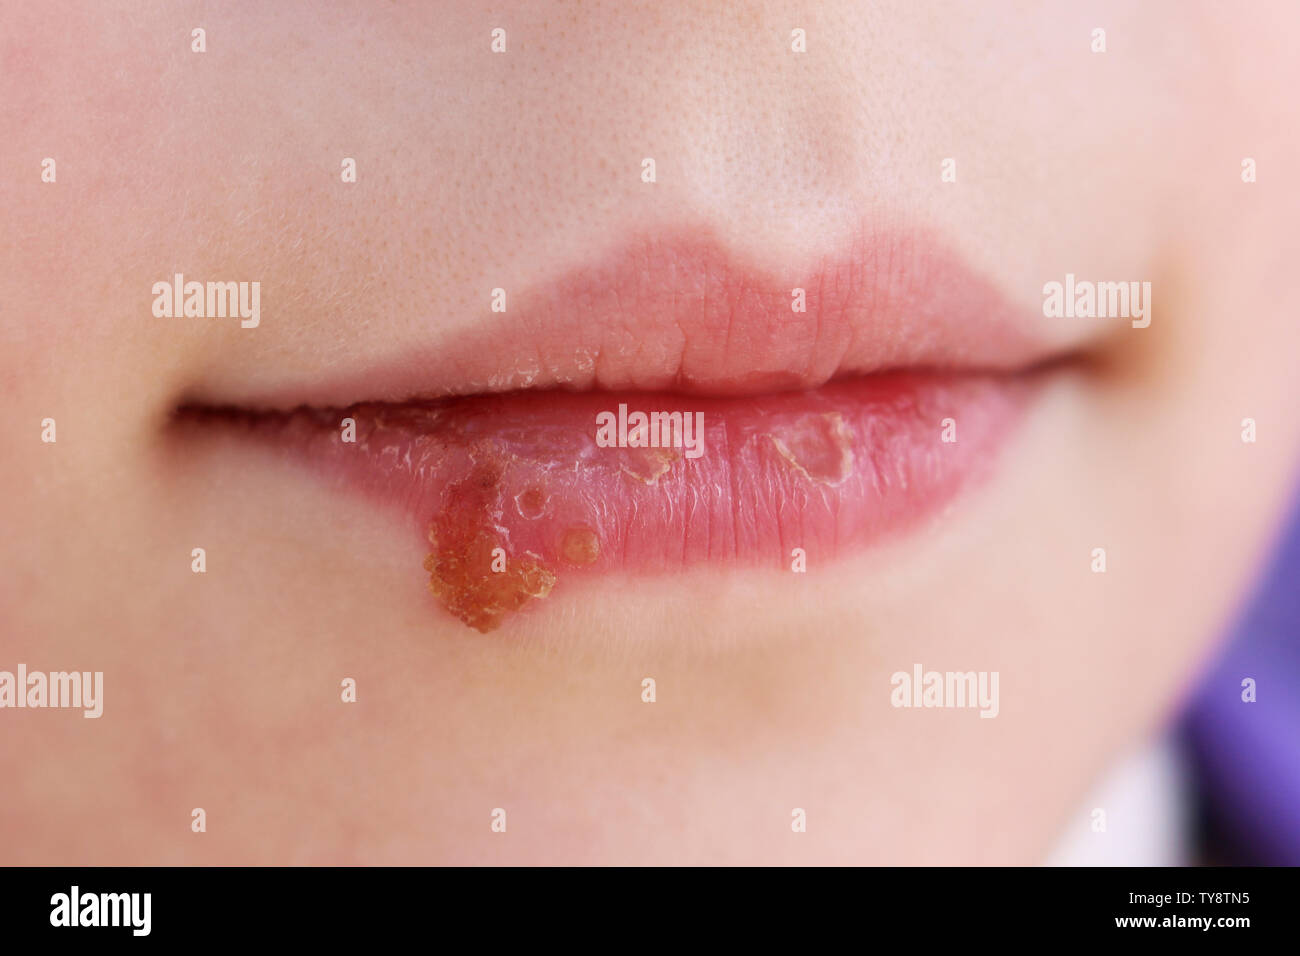 Herpes on lips of child. Treatment ointment. Stock Photo